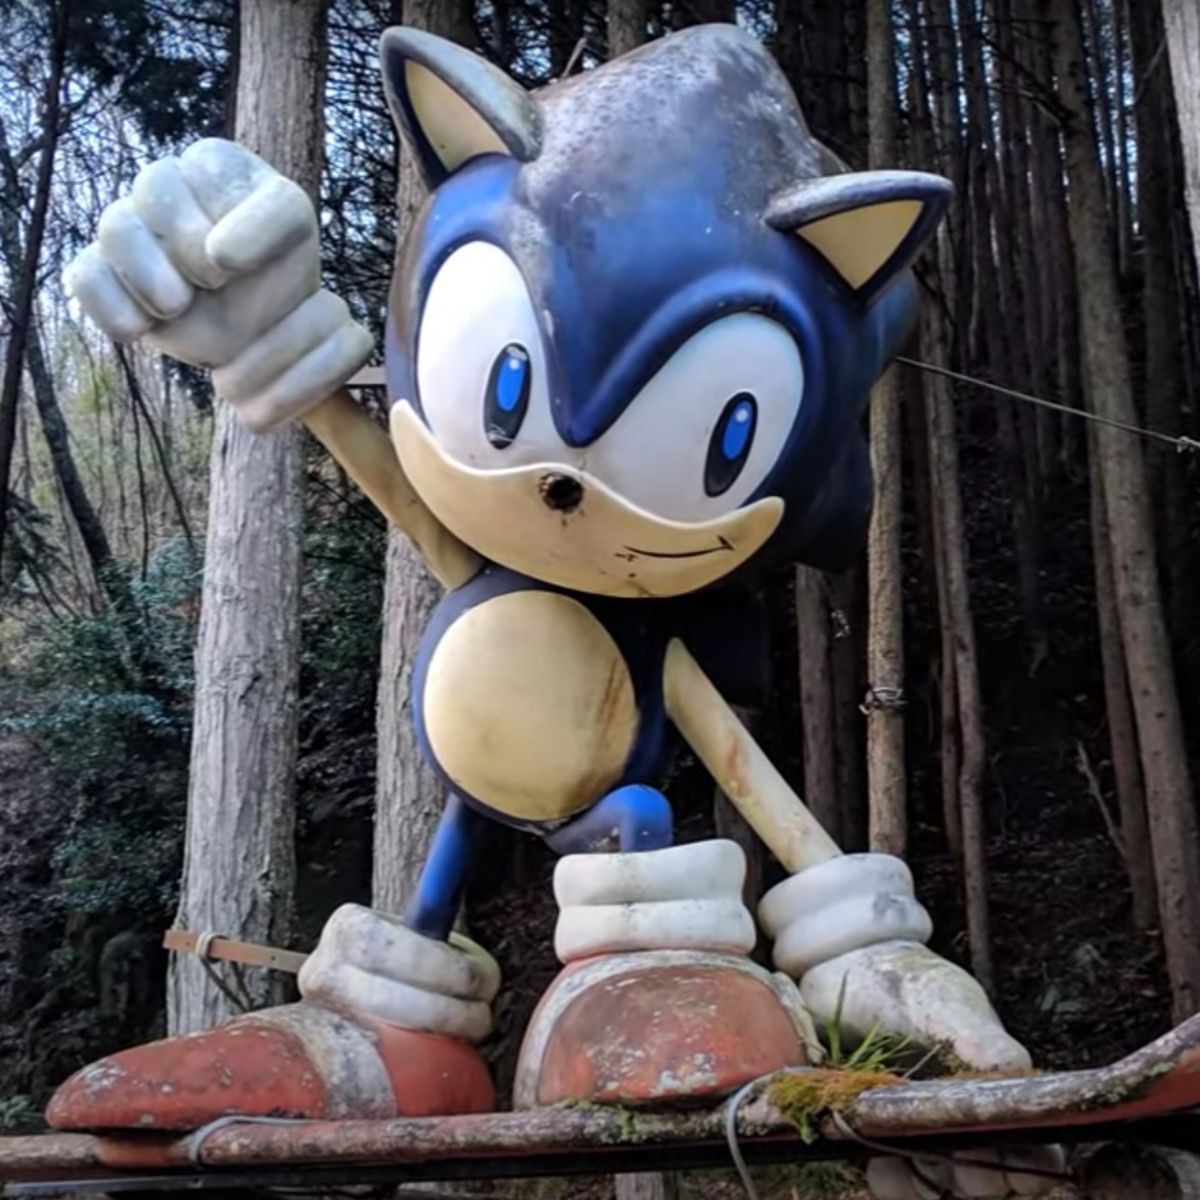 Sonic the Hedgehog will have a new 3D animation series on Netflix